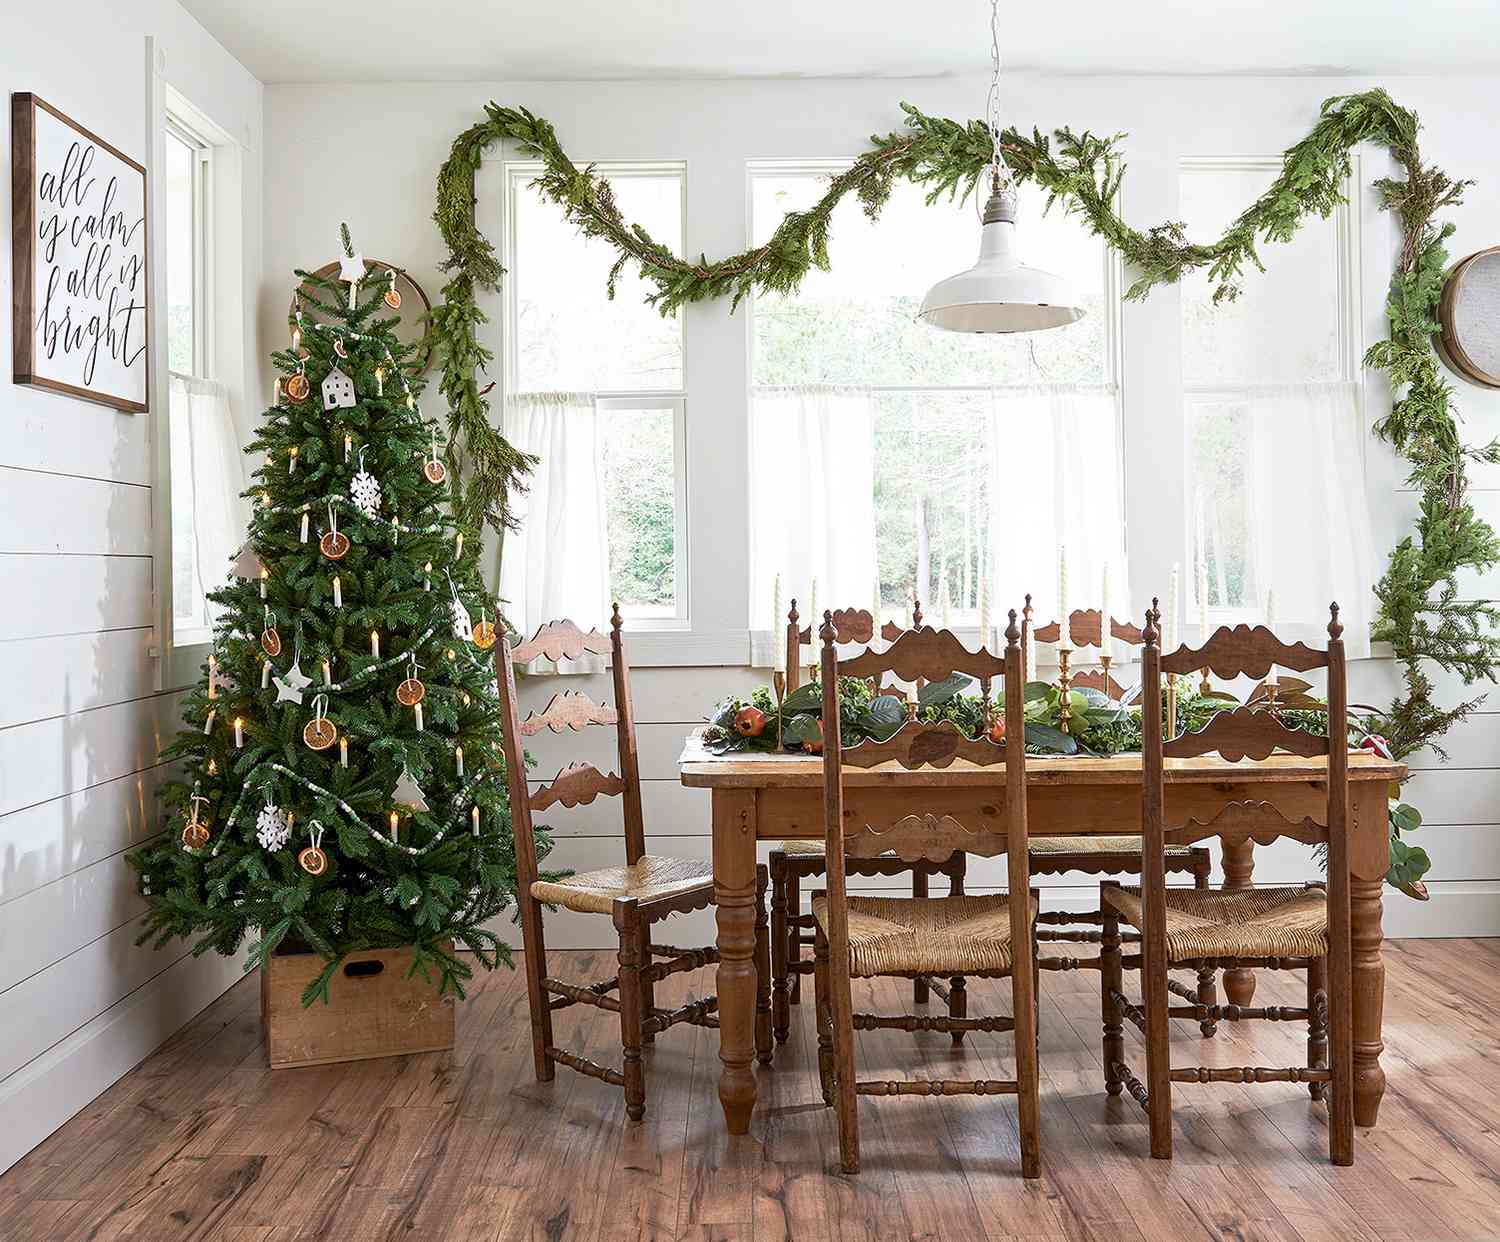 farm dining table near Christmas tree in crate and garland above window